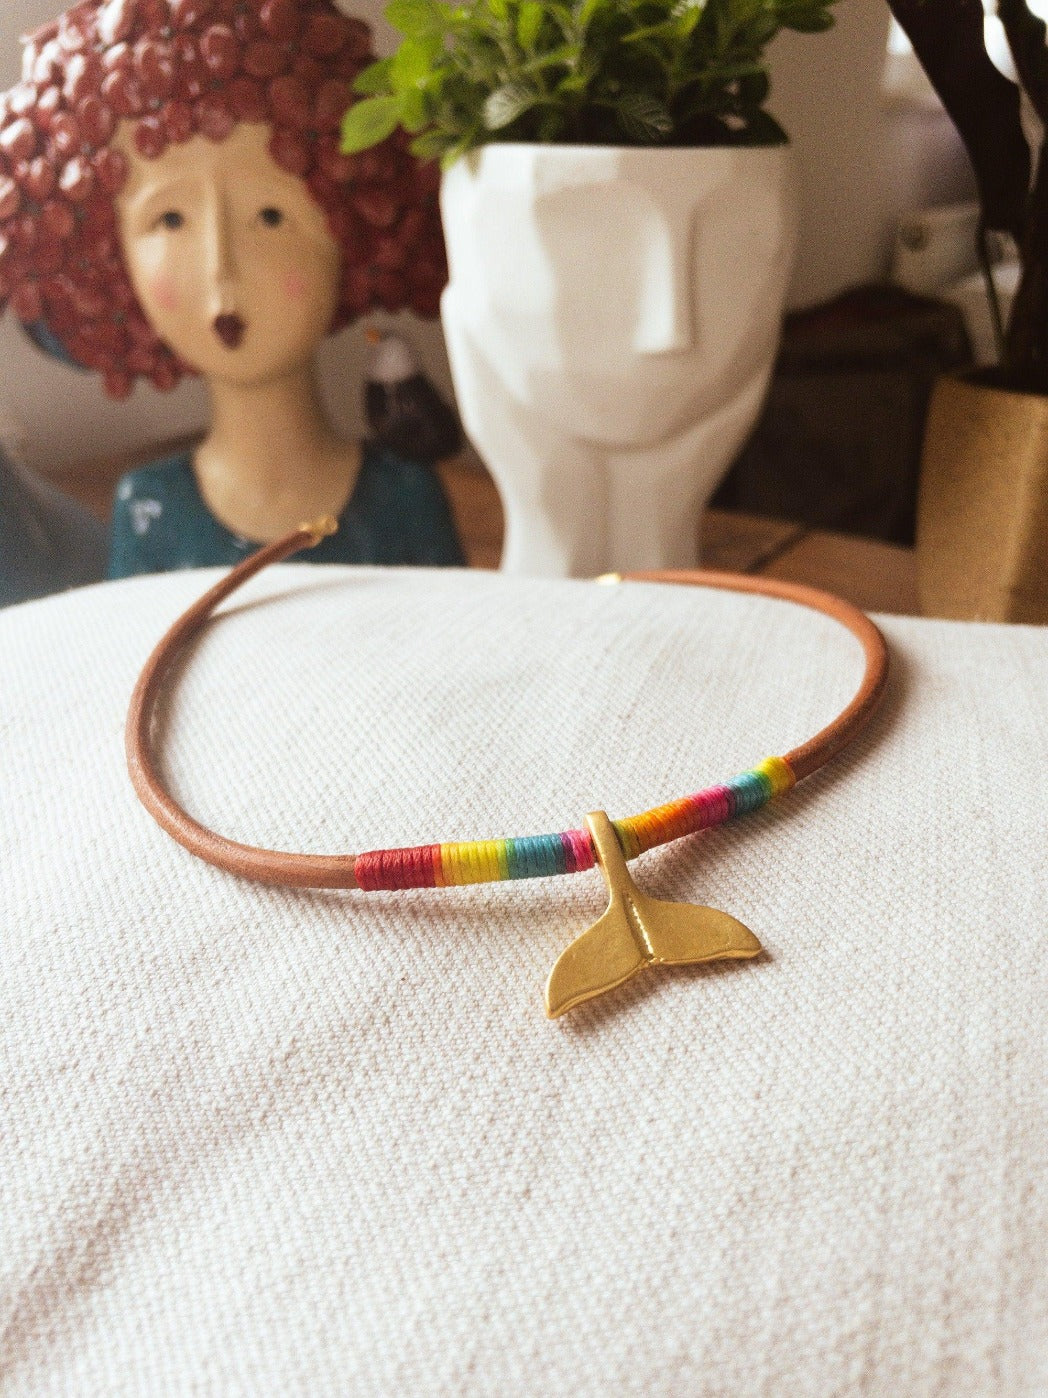 Handmade Ring Leather Pride Necklace with a whale tail charm Pendant made from gold plated brass | Leather Choker - BeachPerfect.de